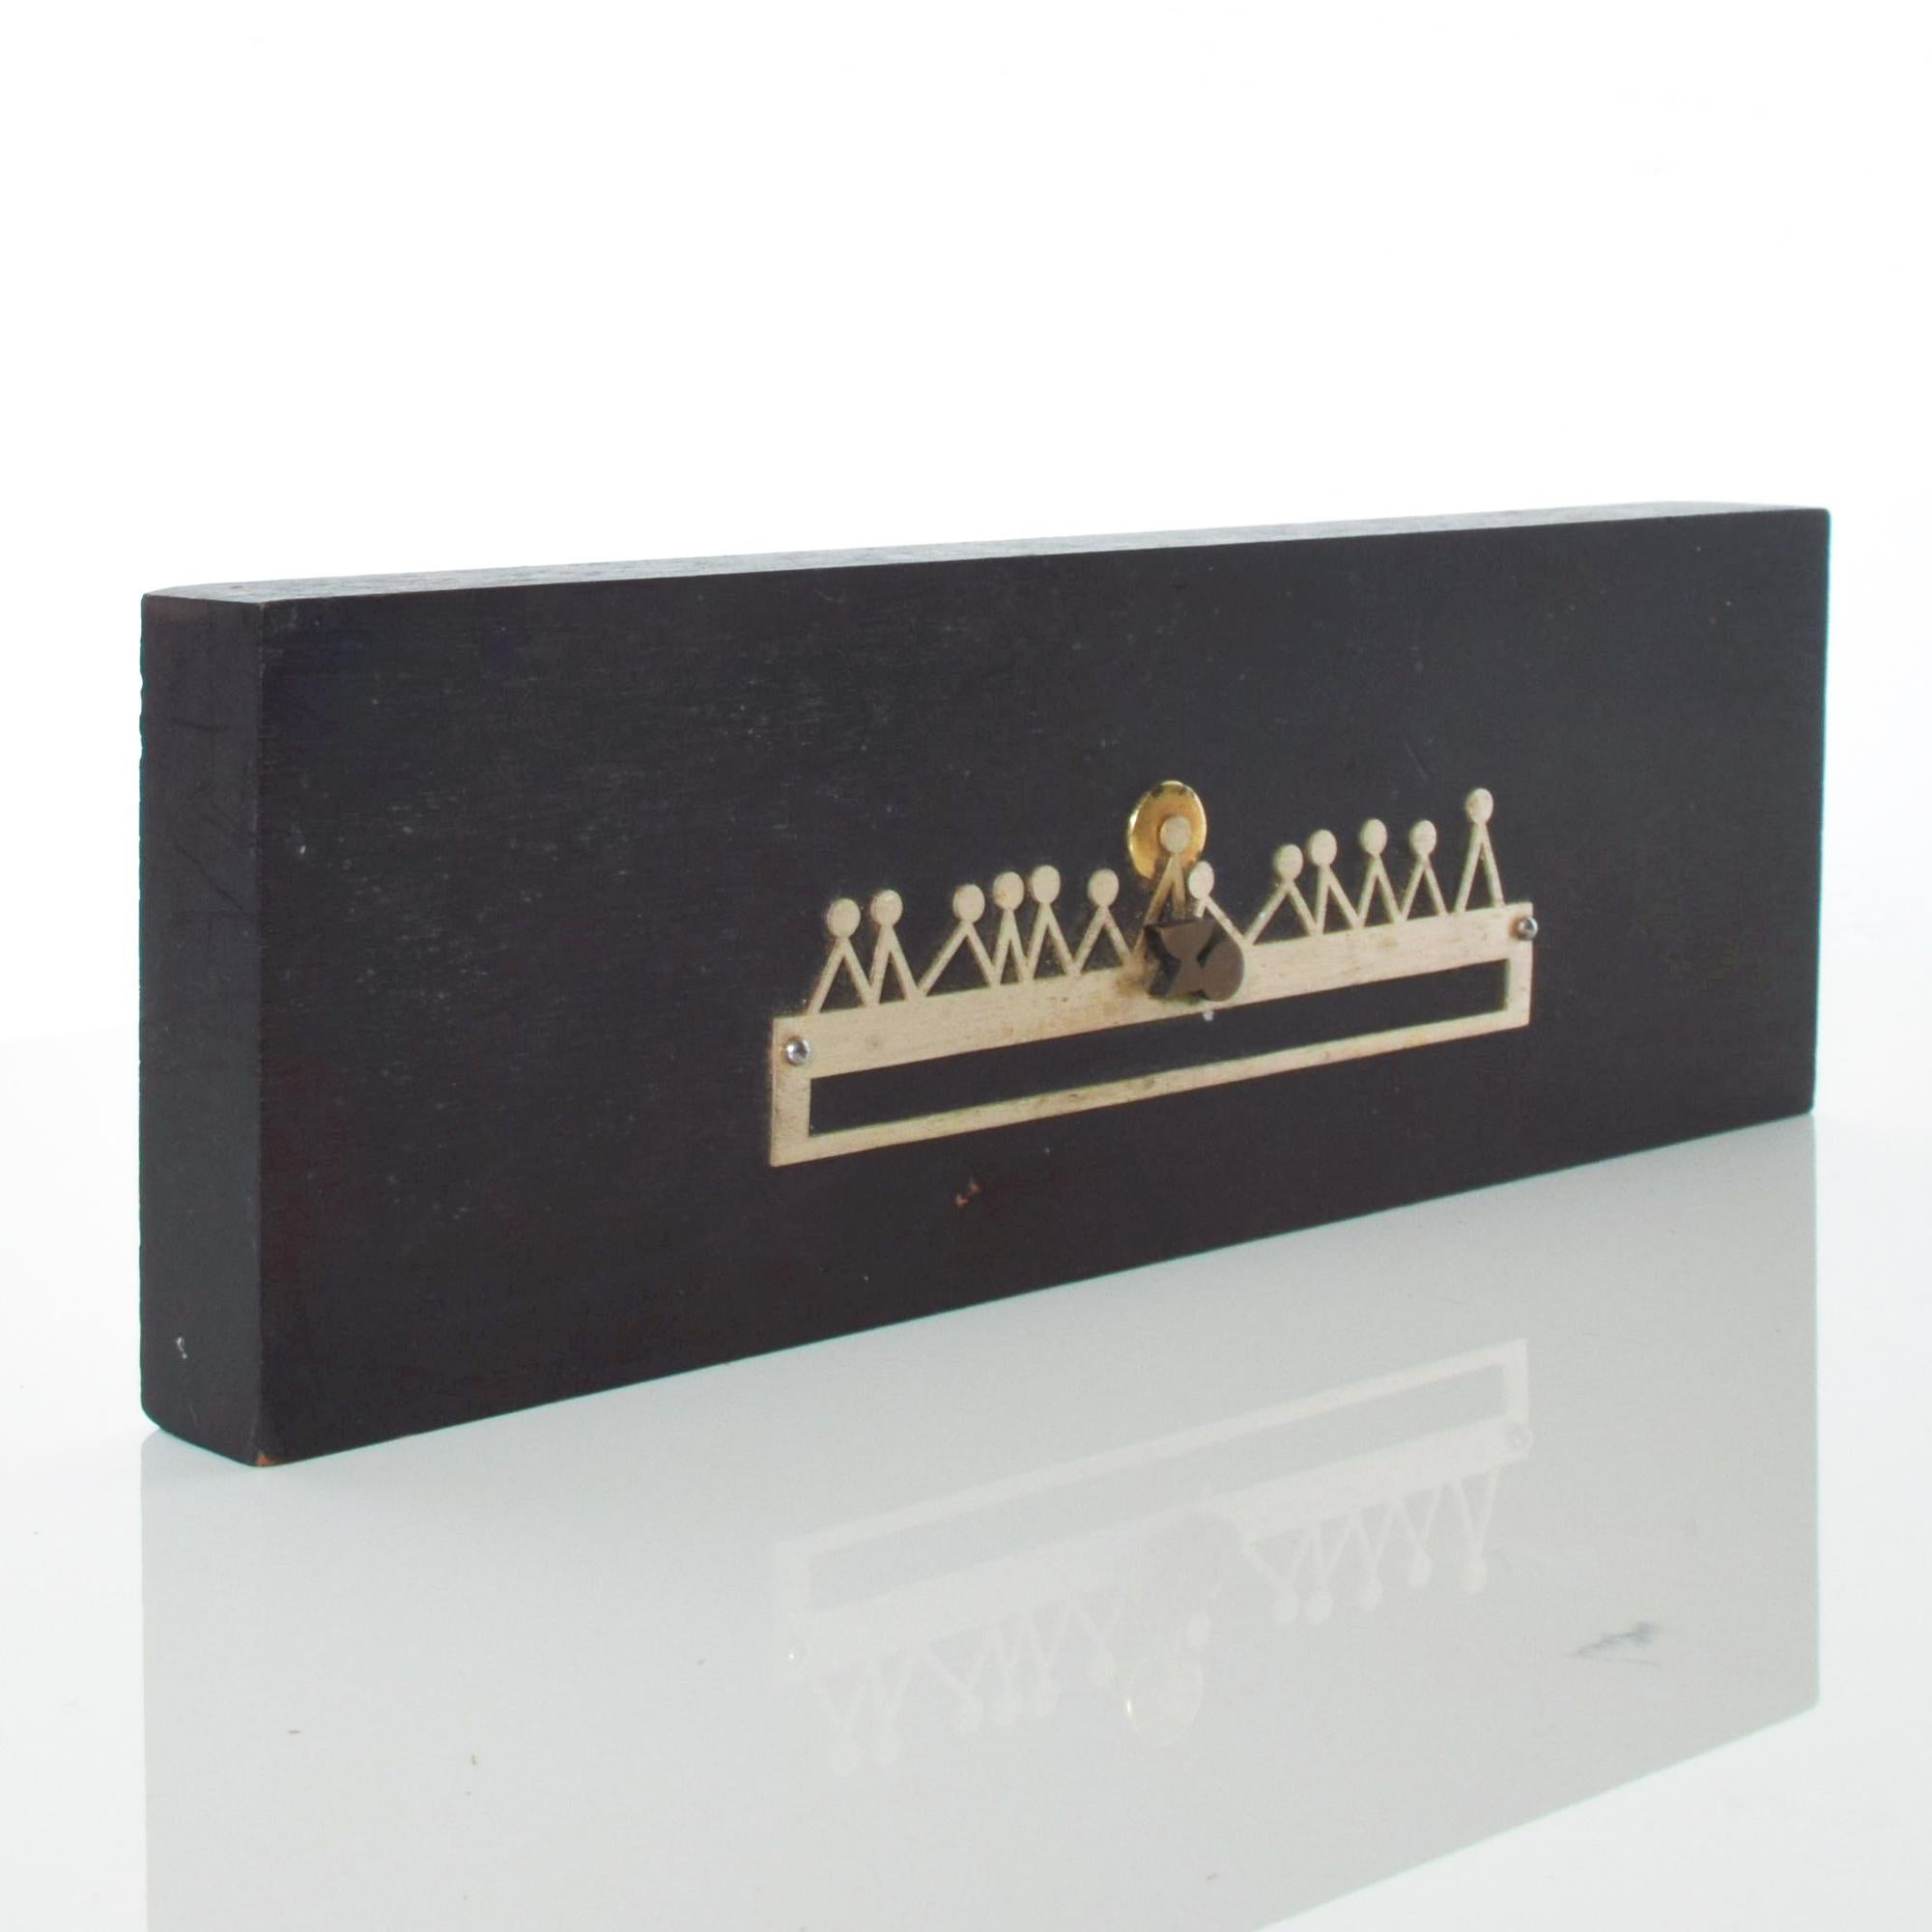 1960s Mid-Century modern last supper abstract wall art sculpture modernist plaque by Emaus Benedictine Monks of Cuernavaca, Mexico 1960s
Vintage piece handcrafted in wood with mixed metals of sterling silver and brass detail.
Measures: 9.94